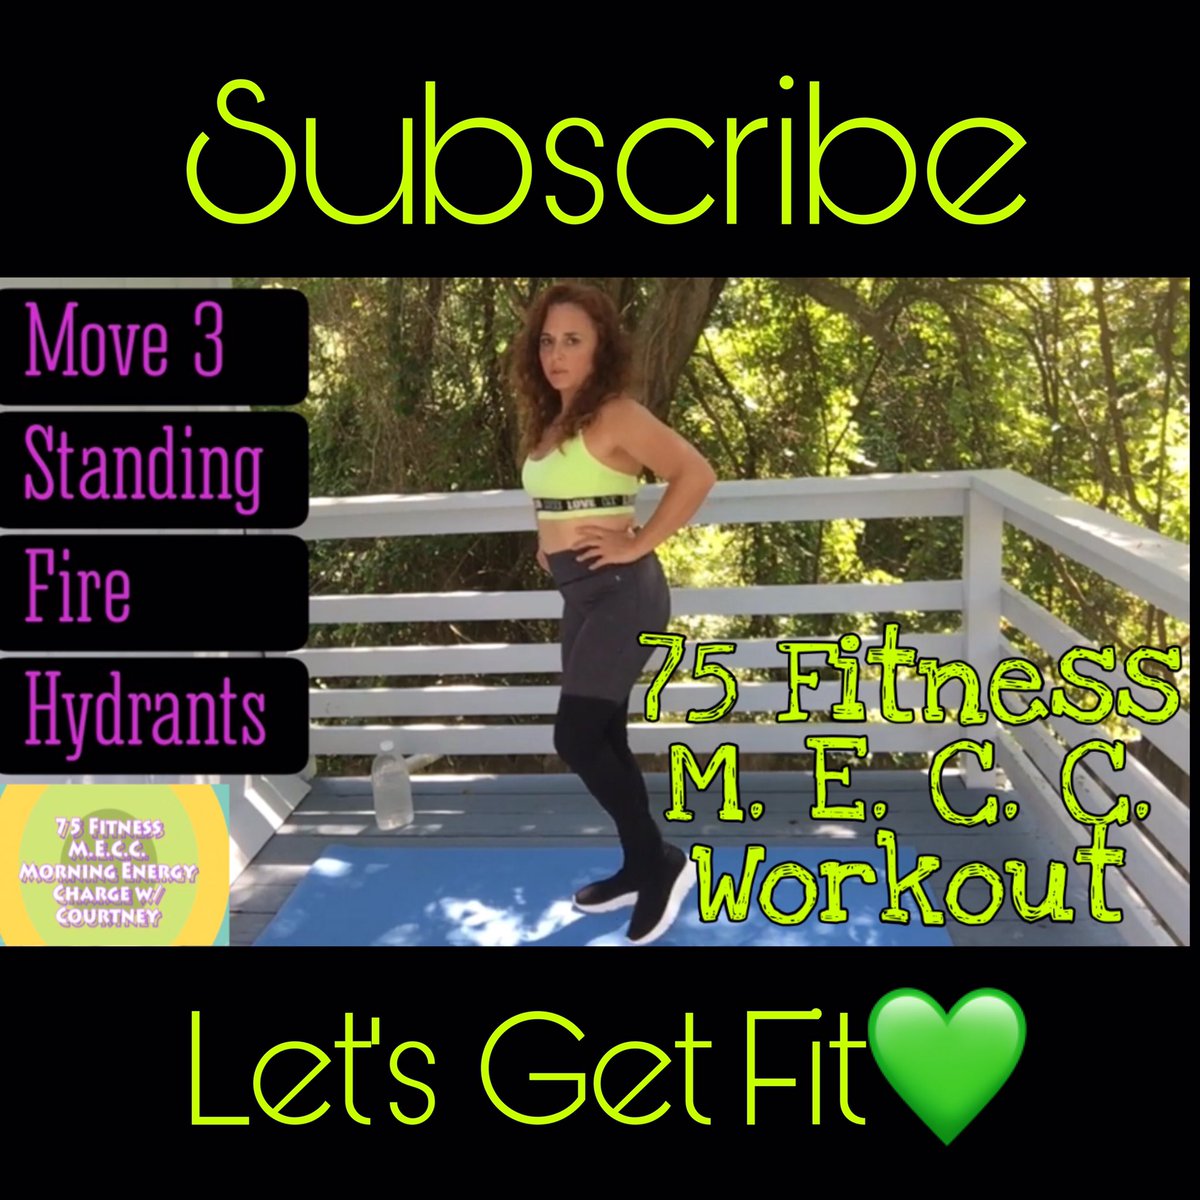 youtu.be/RMEIVNE7OsA Here is your MECC workout for this am!! It focuses on glutes. 4 moves, 14 reps, 4x #sundayvibes #fitness #gluteexercises #booty #workout #exercise #HowtoBeauty #burnfatduringtheday #fun #weekendvibes #75fitters #hotmomclub